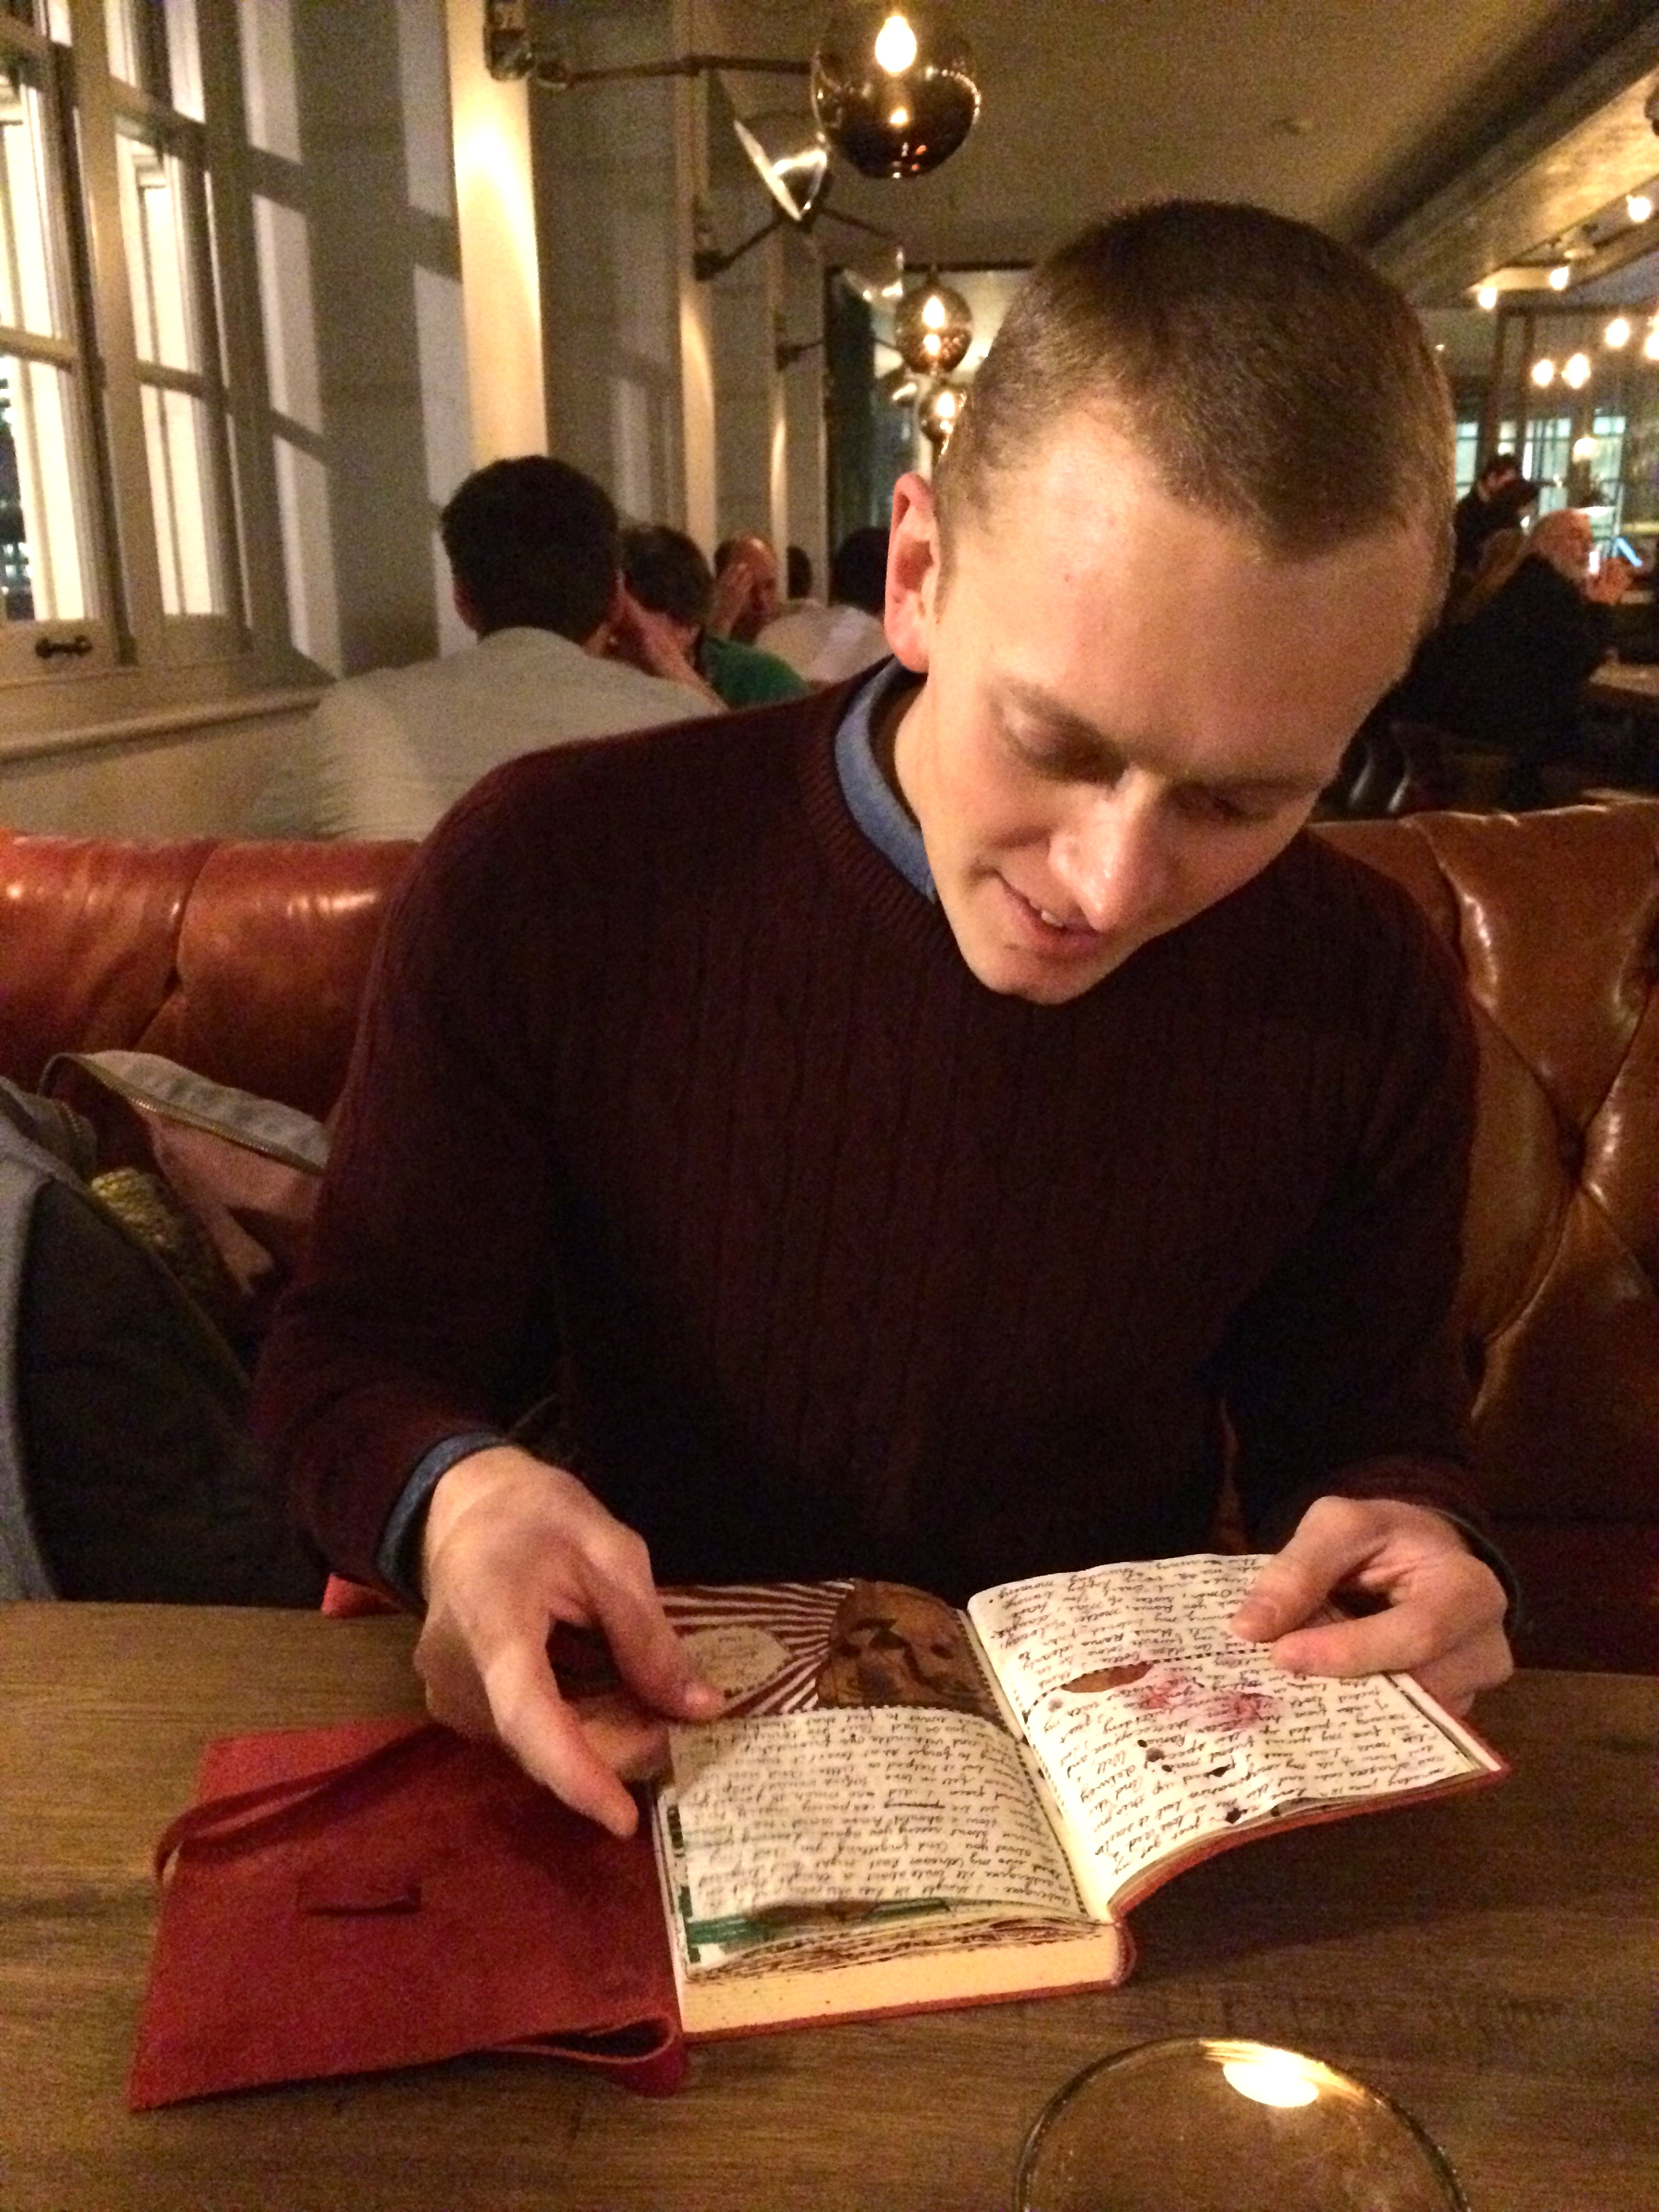 robert (or rob, bob or bobby) flips through my journal at the swan pub near shakespeare's globe theatre